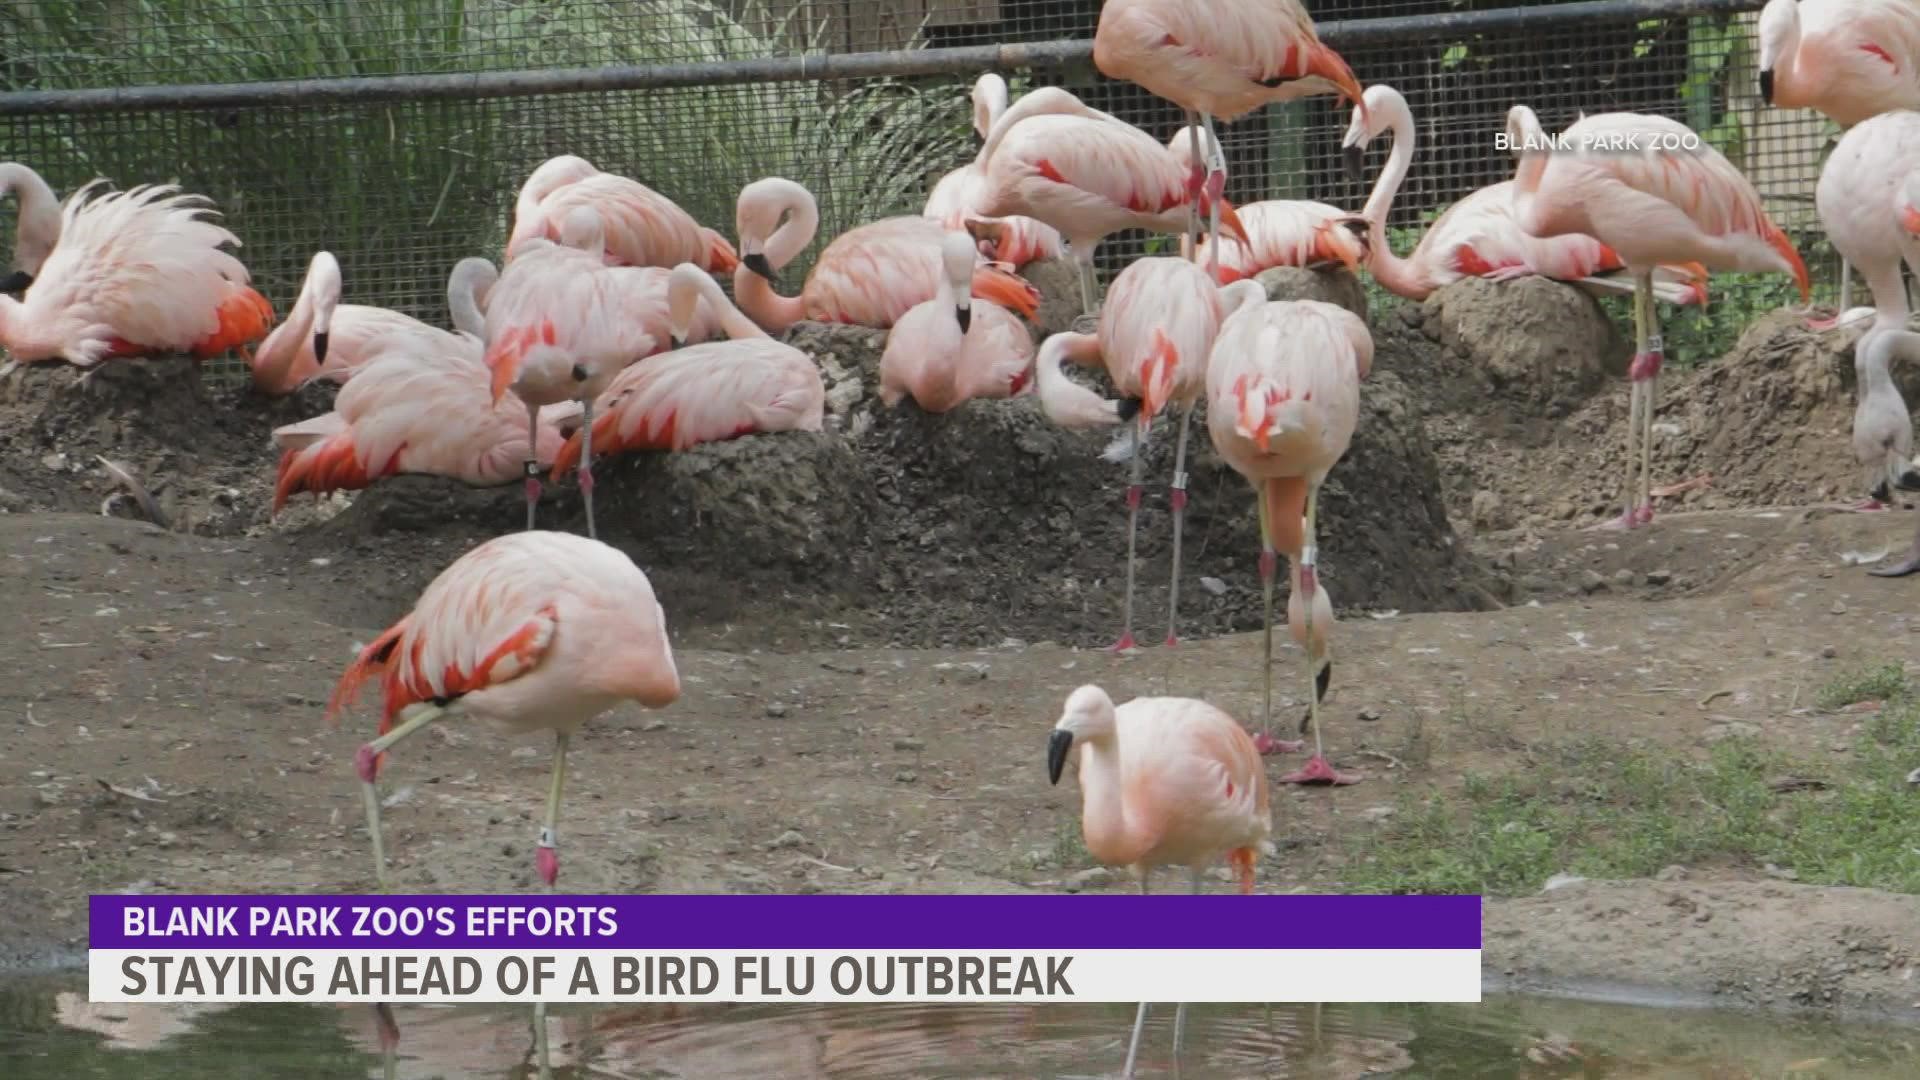 One of the zoo's vets says the attraction is monitoring its birds daily and taking precautions to keep them healthy and safe.